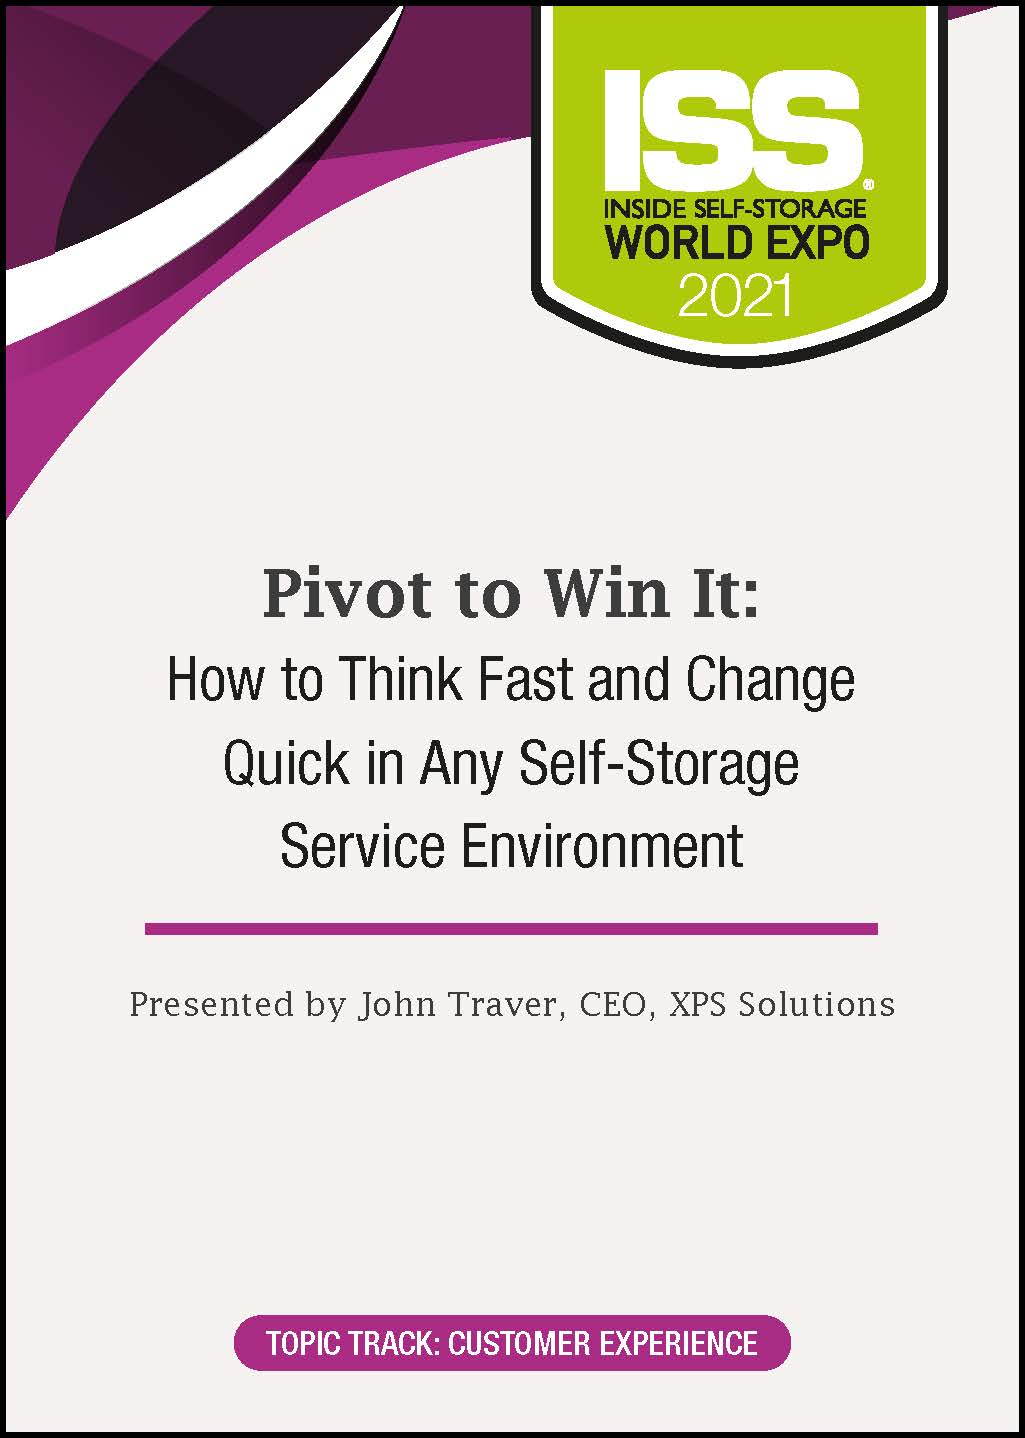 Pivot to Win It: How to Think Fast and Change Quick in Any Self-Storage Service Environment